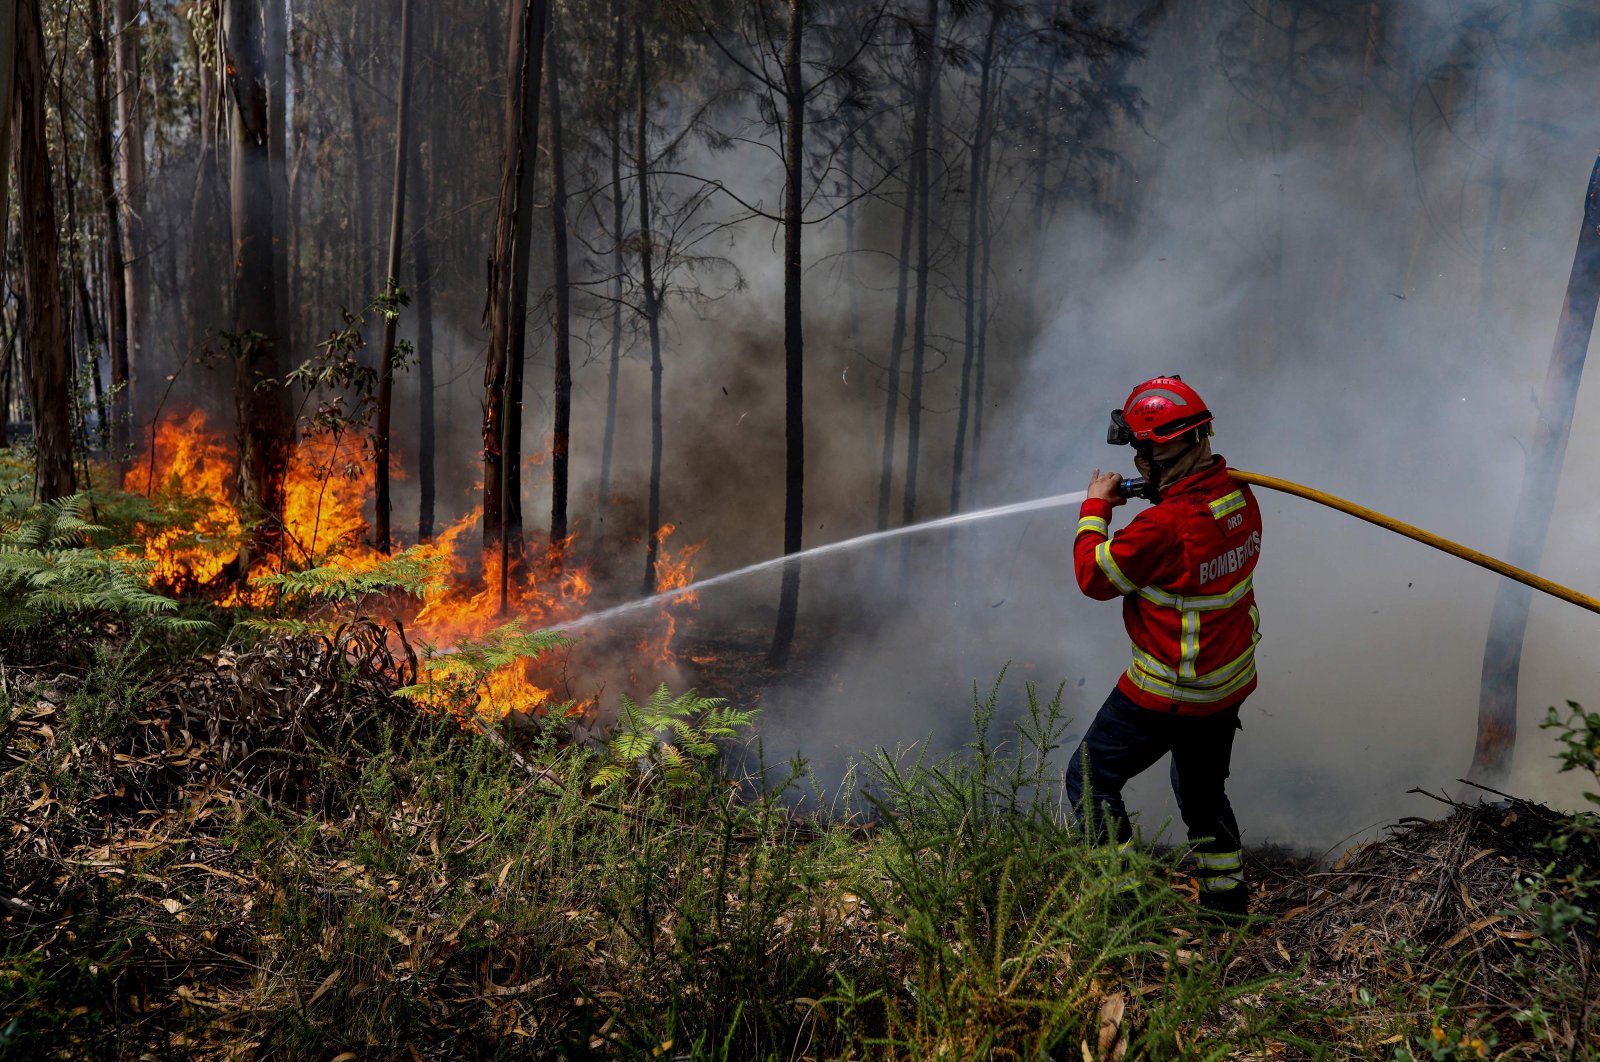 A firefighter uses a hose during firefighting operations at Espite in Ourem, Portugal, July 13, 2022. (AFP Photo)